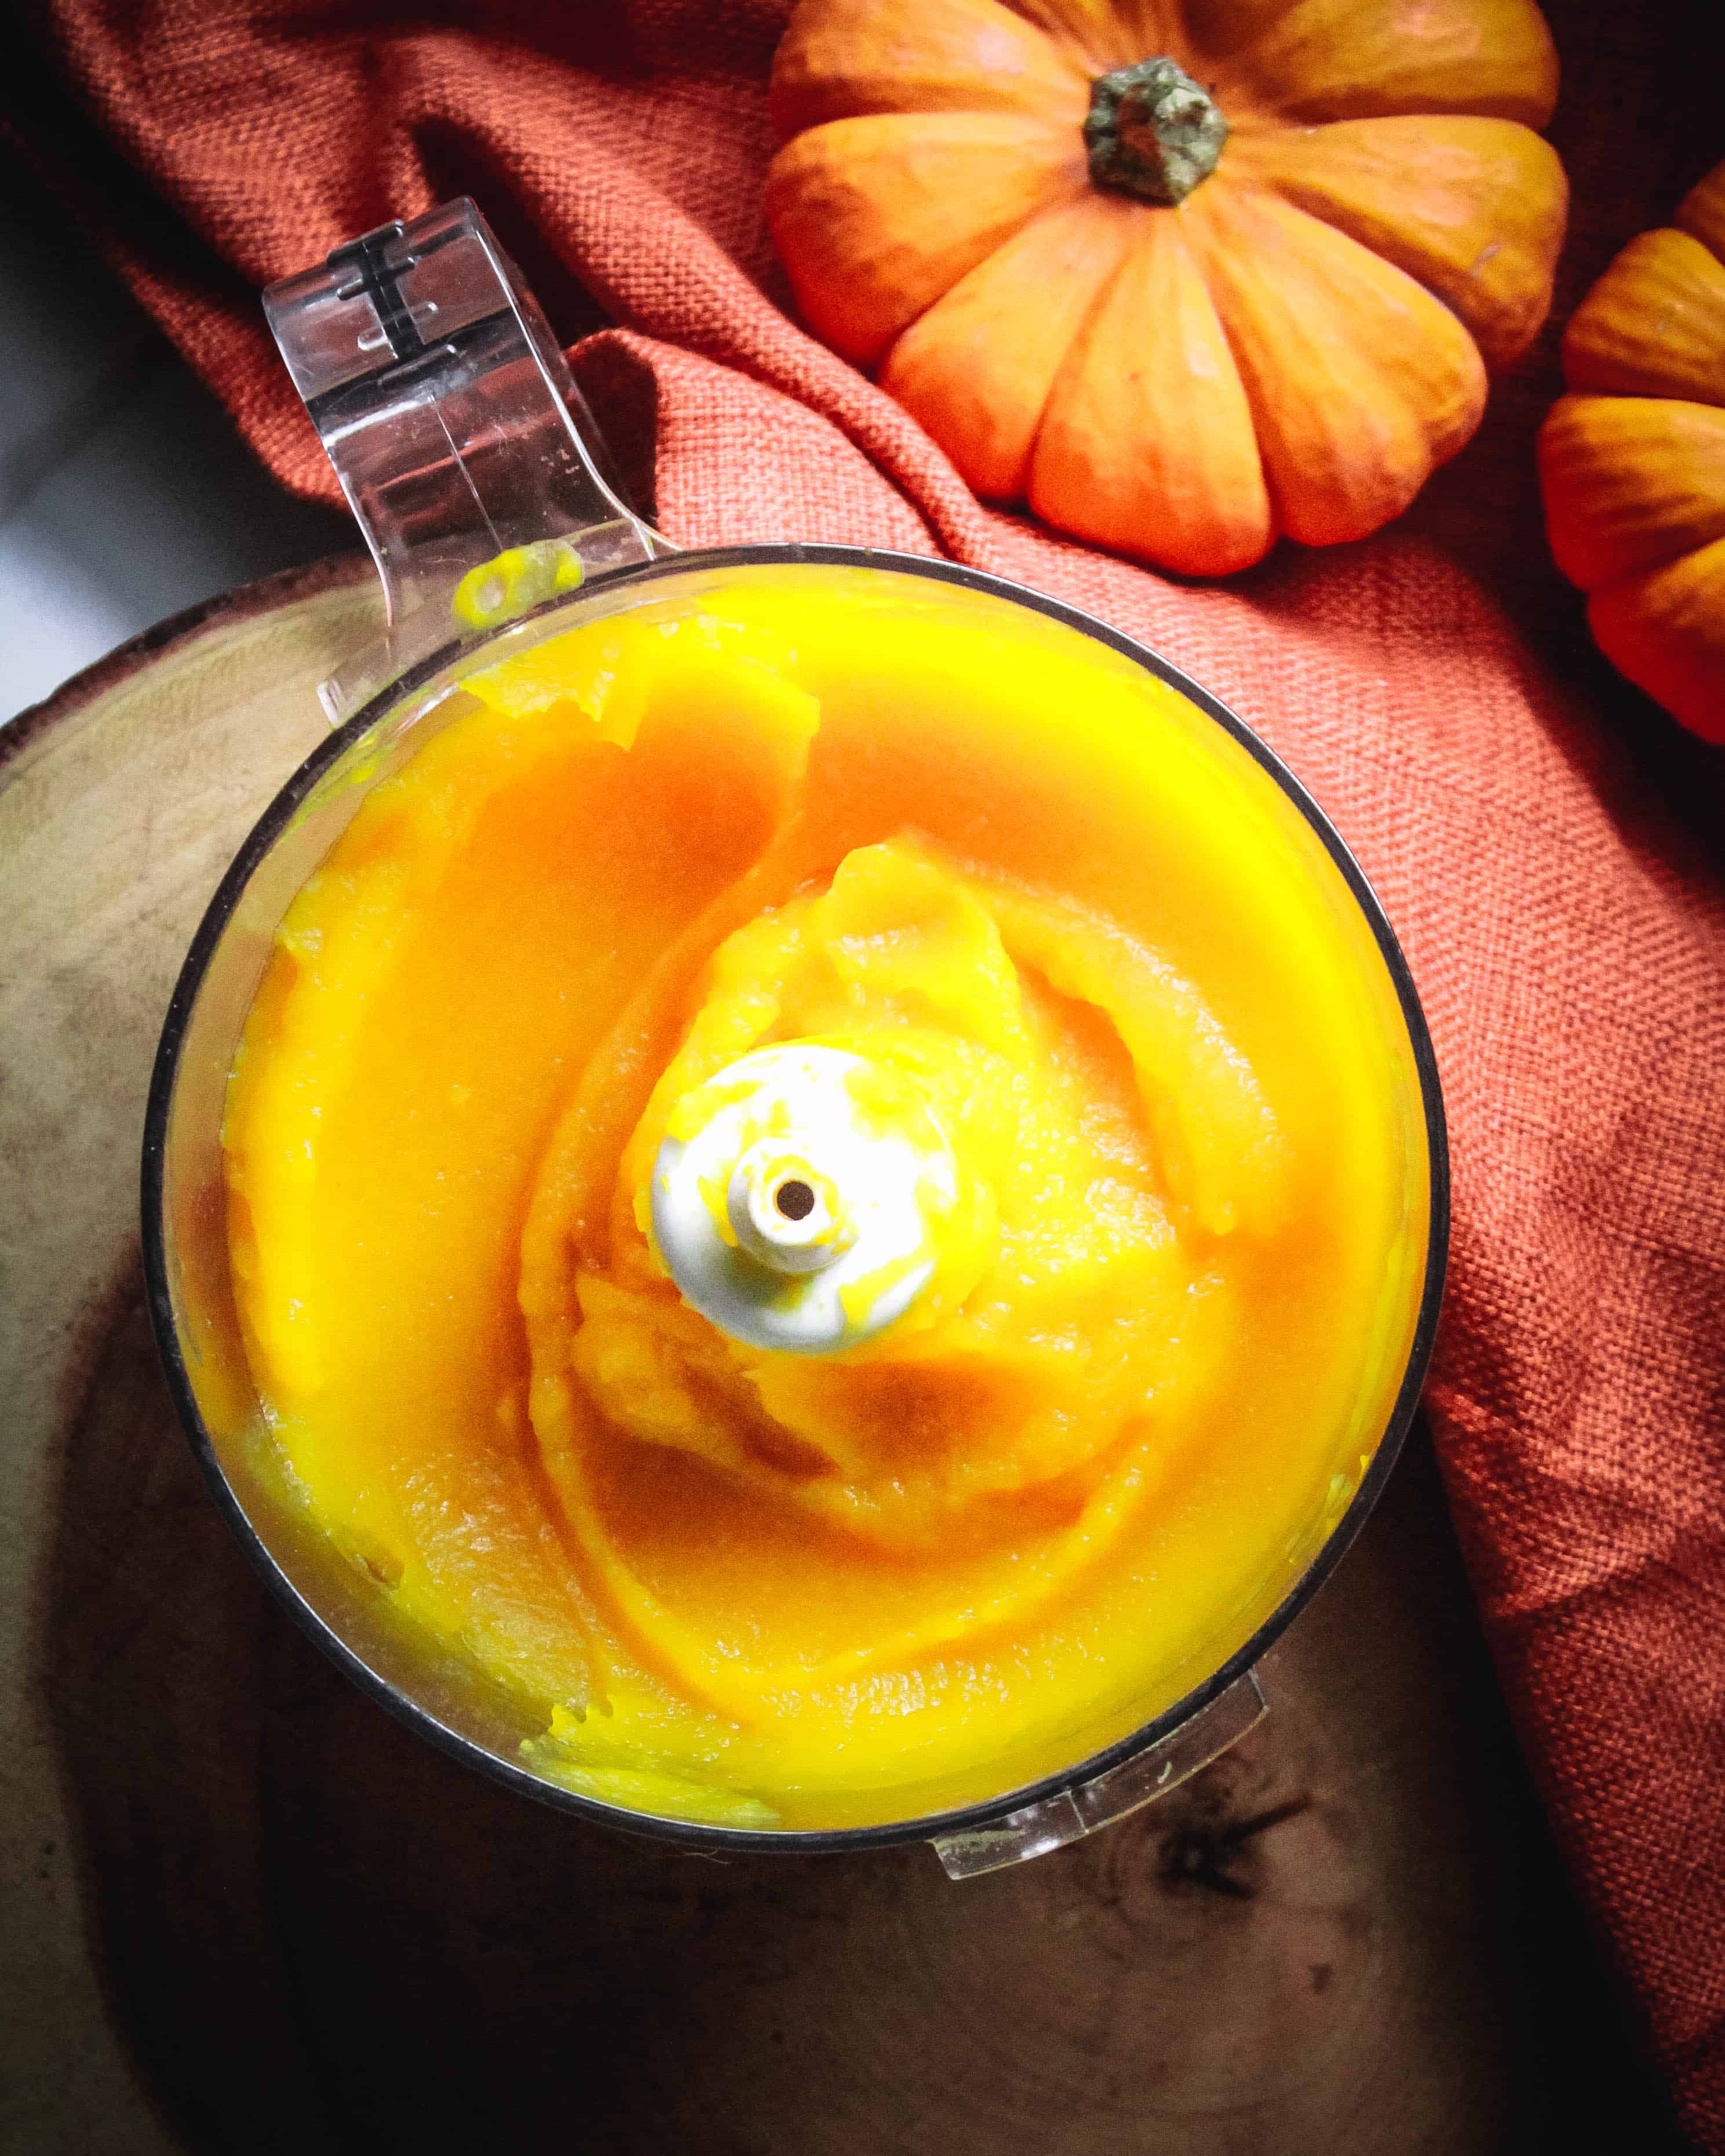 How to make pumpkin puree from scratch